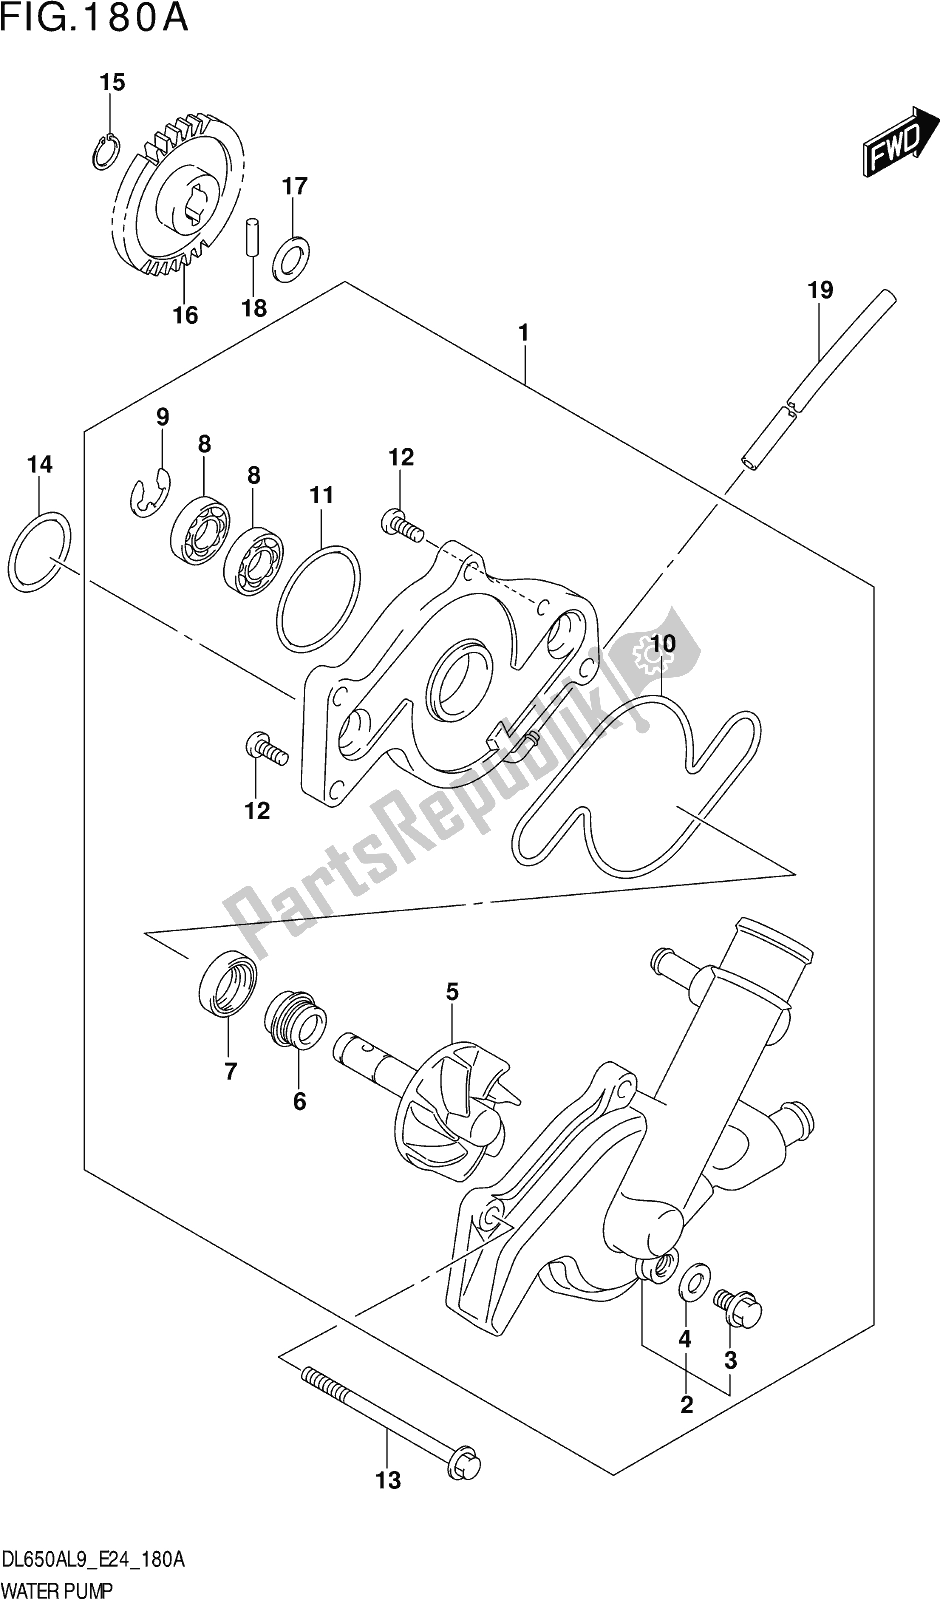 All parts for the Fig. 180a Water Pump of the Suzuki DL 650A V Strom 2019